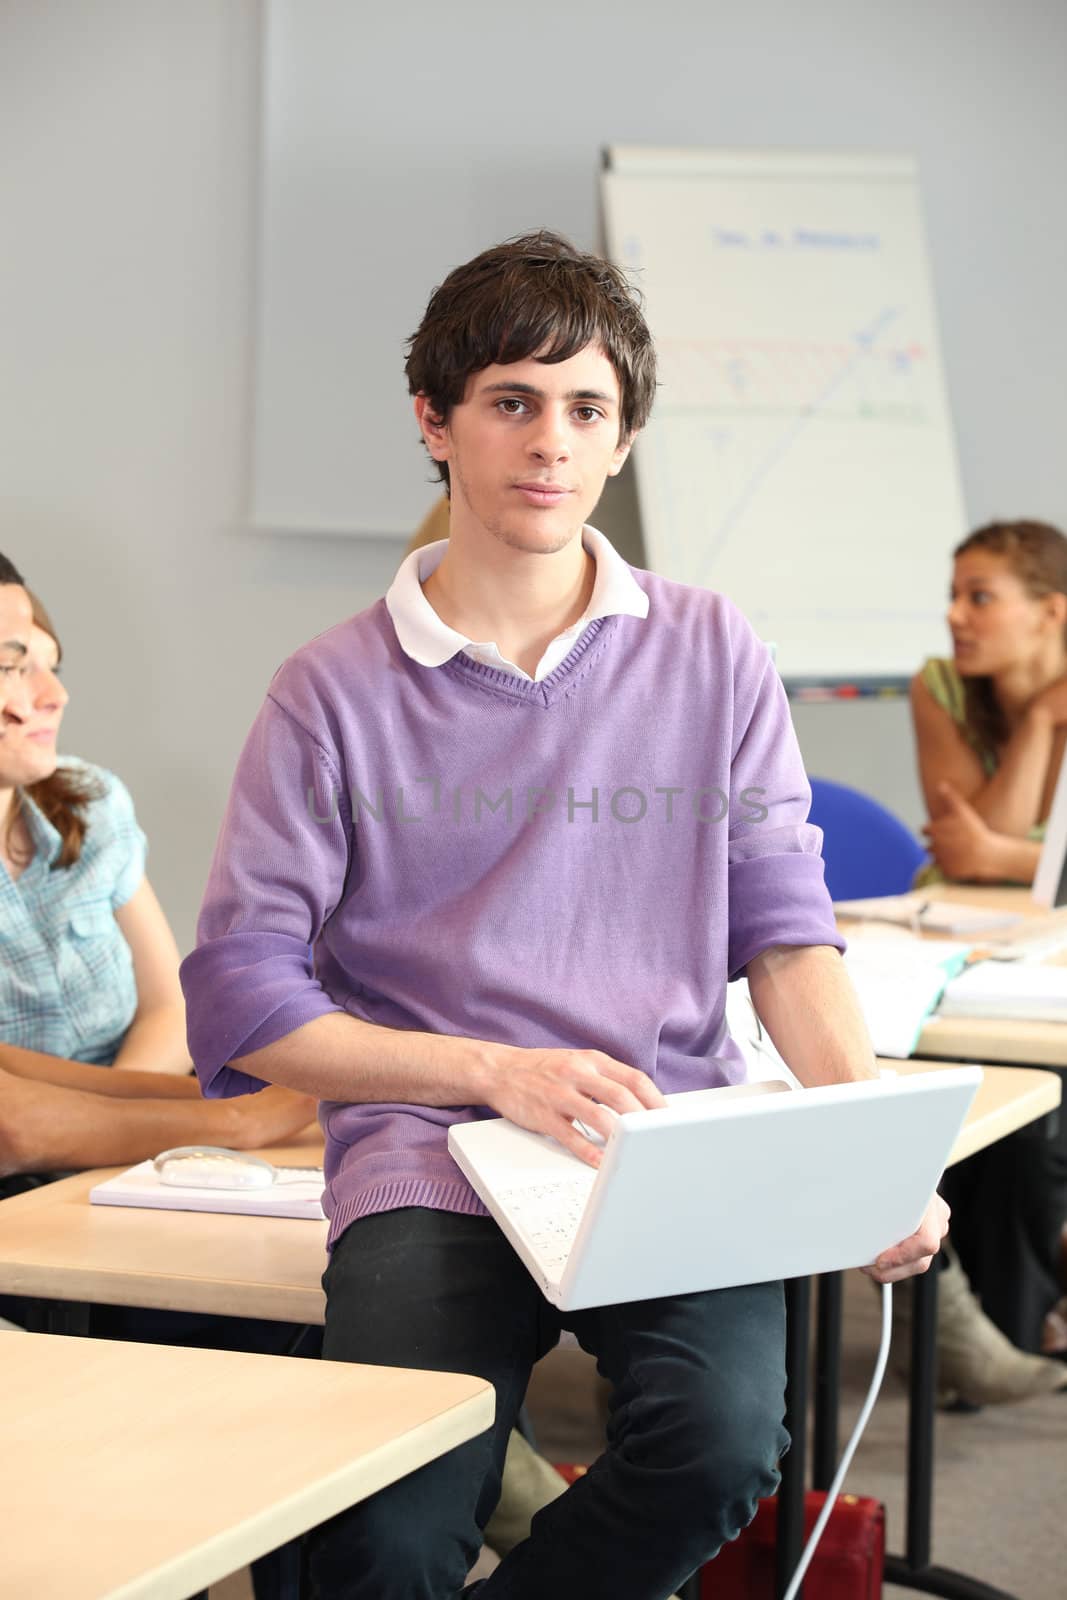 A young man at school with his laptop